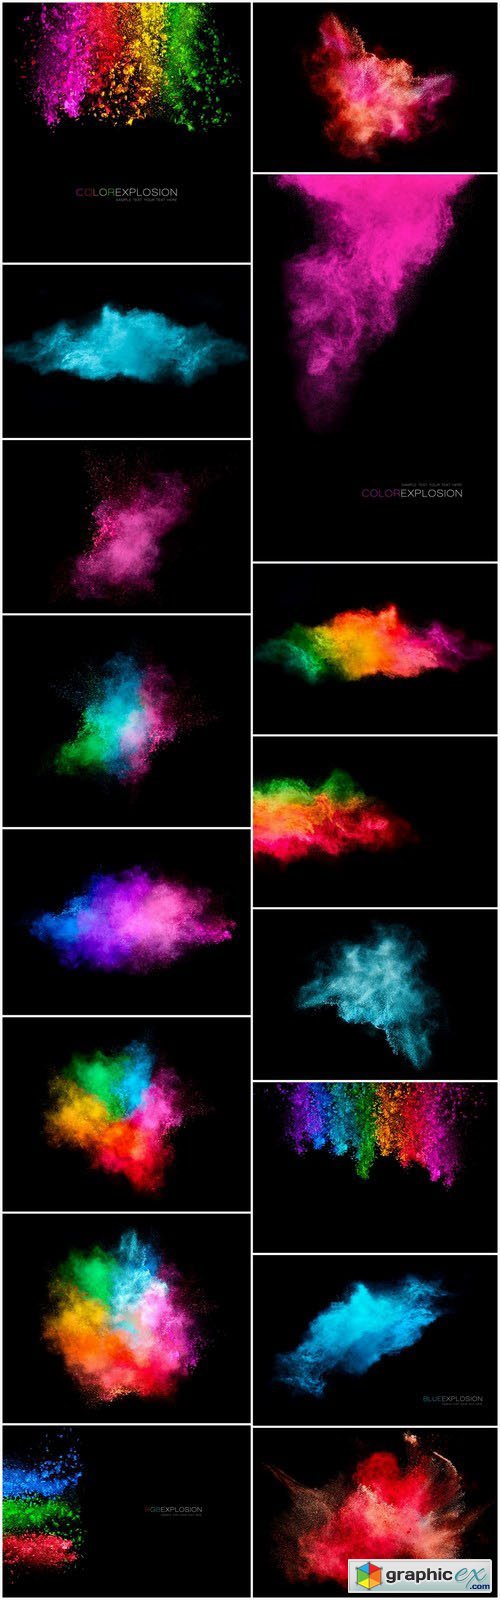 Explosion of Colored Powder 2 - 16xUHQ JPEG